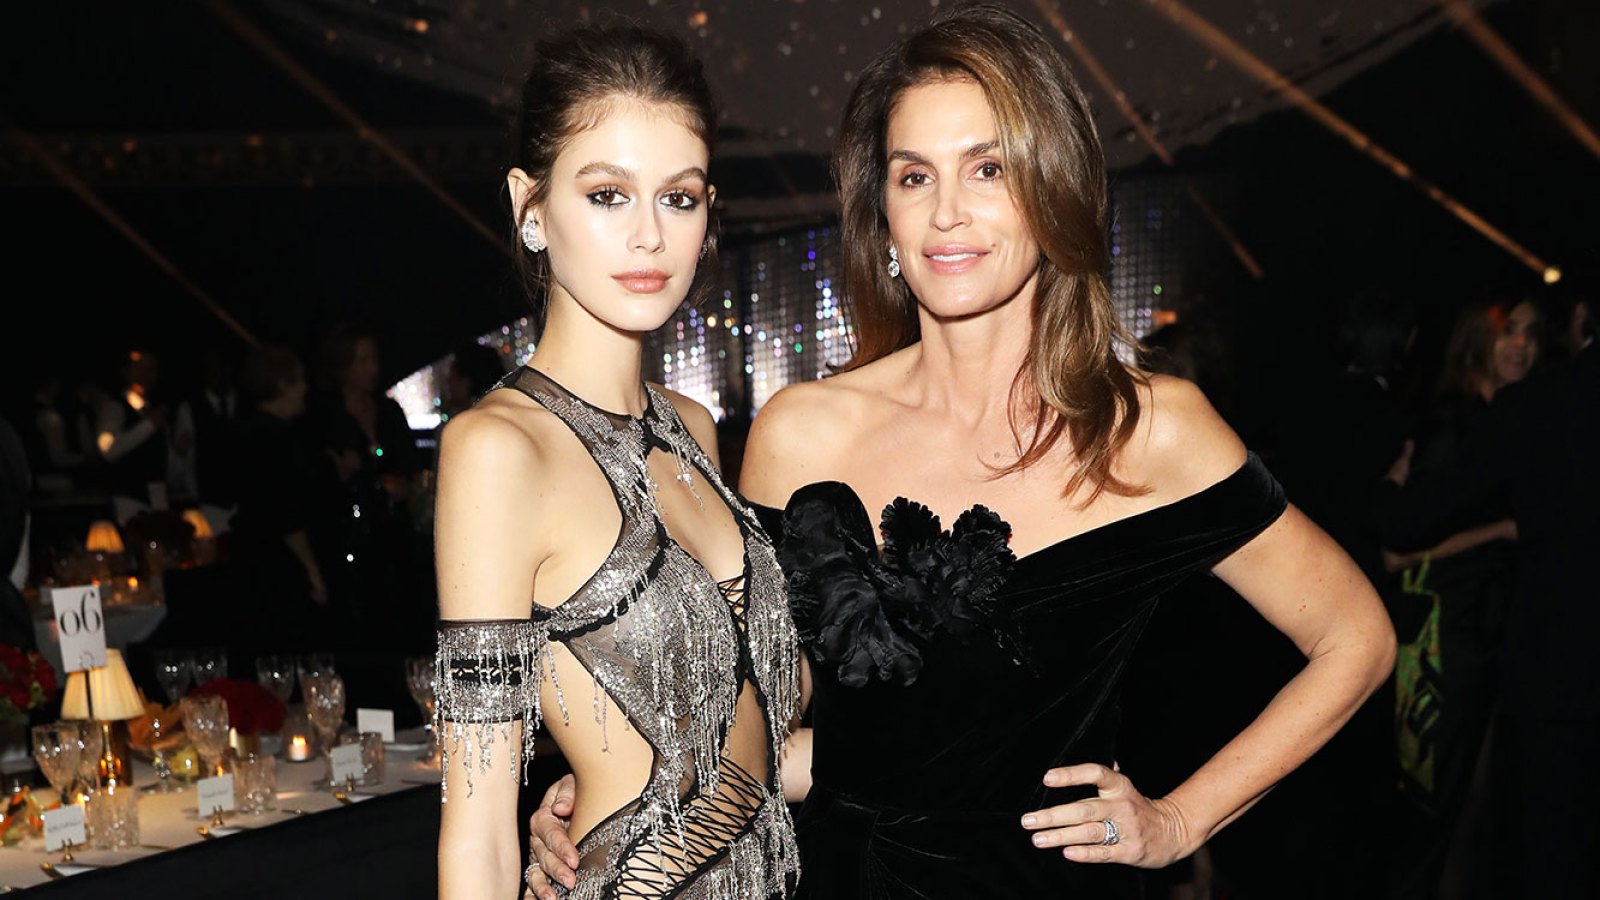 Cindy Crawford Learns Beauty Tips From Her 17-Year-Old Supermodel Daughter Kaia Gerber